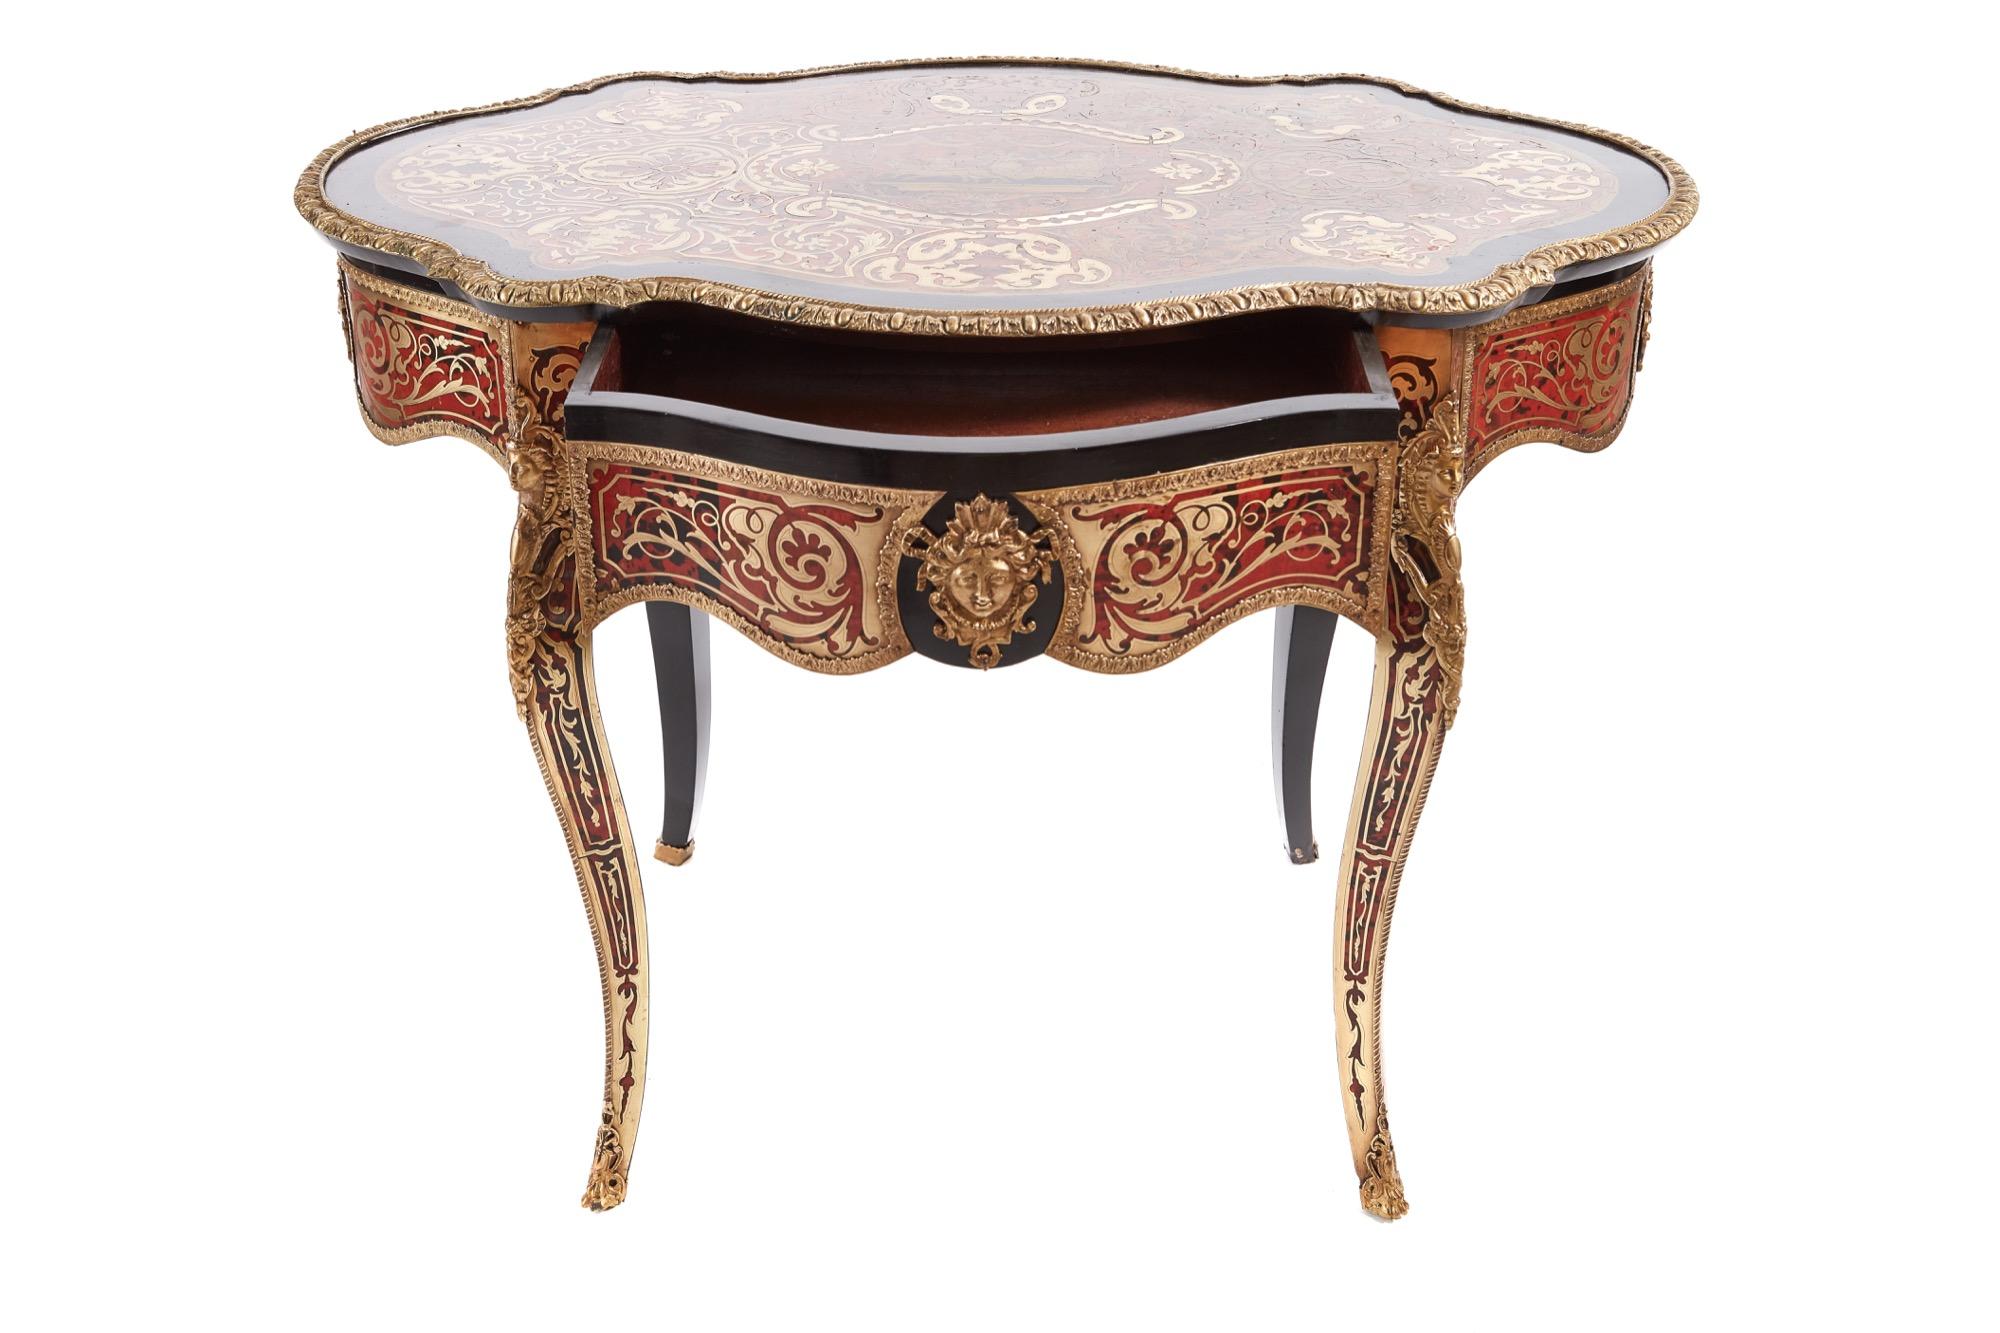 Antique 19th century French boulle centre table. The serpentine shaped top features all-over tortoiseshell and profuse inlaid brass decoration, quality gilt bronze mounts and a single drawer, standing on elegantly shaped legs with brass inlay and